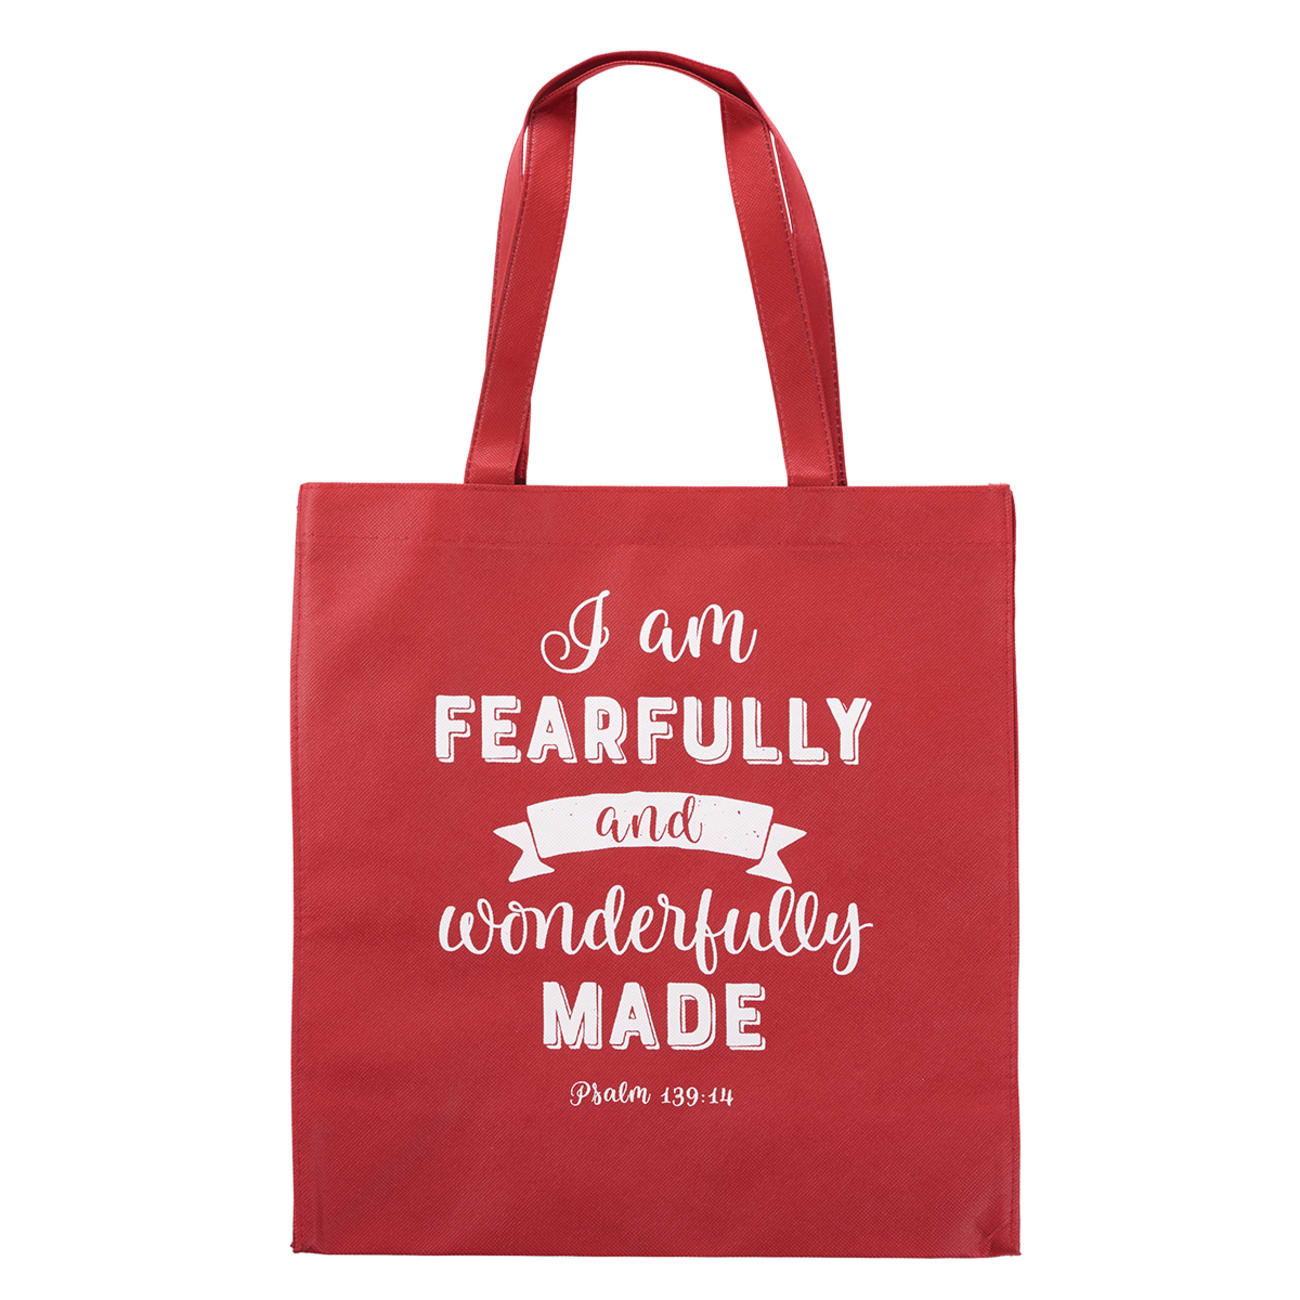 Tote Bag: I Am Fearfully and Wonderfully Made, Red/White (Psalm 139:14) Soft Goods